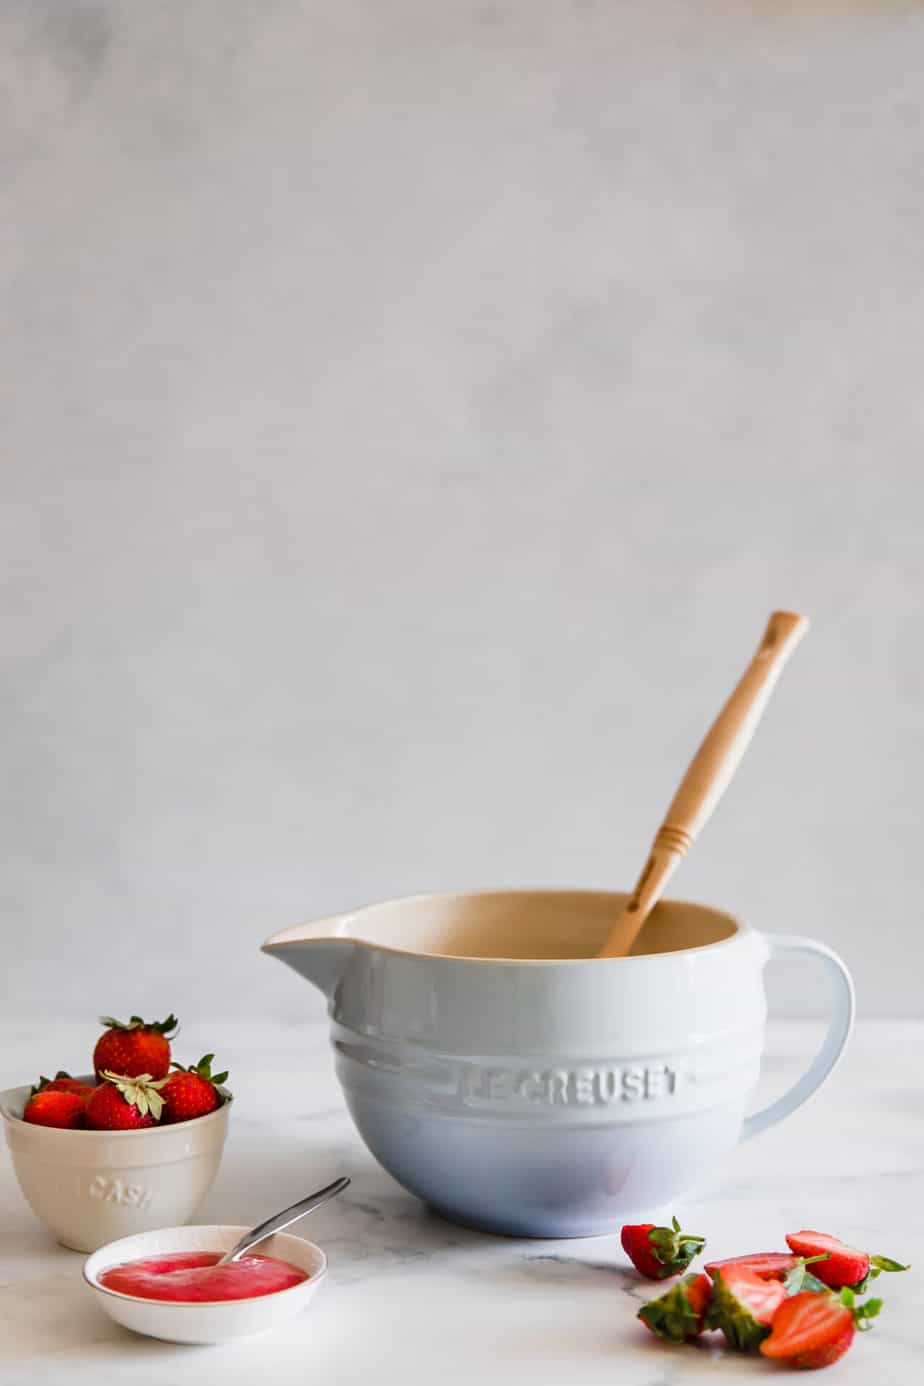 A mixing bowl with fresh strawberries and strawberry puree.